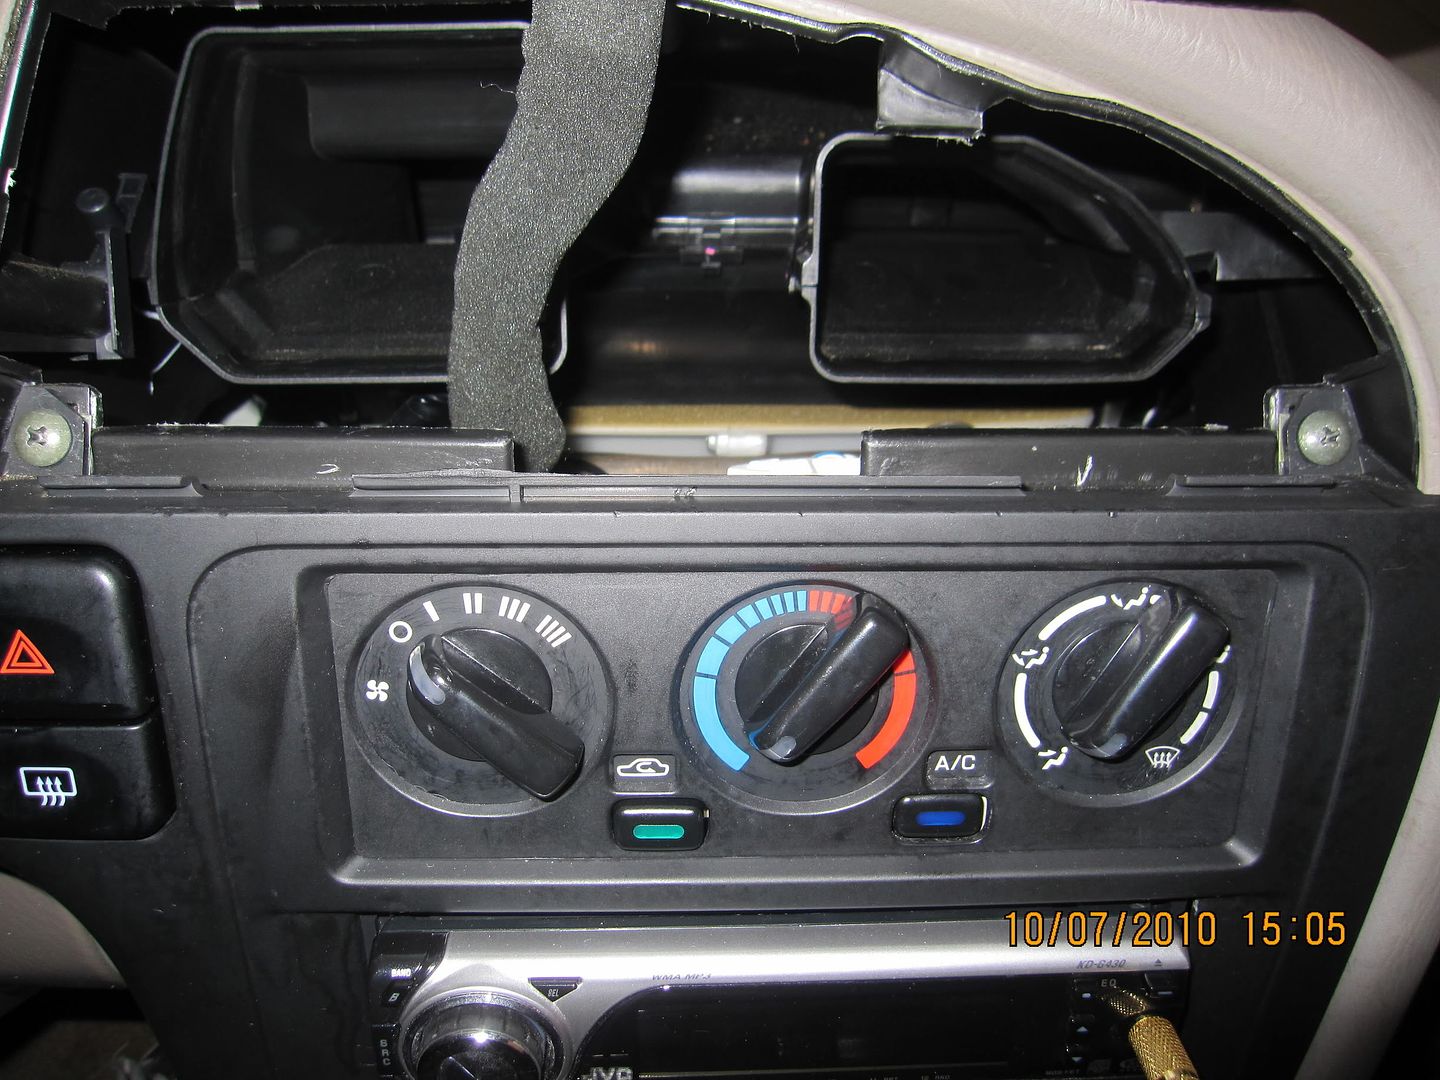 How to remove stereo from nissan pathfinder 2001 #7